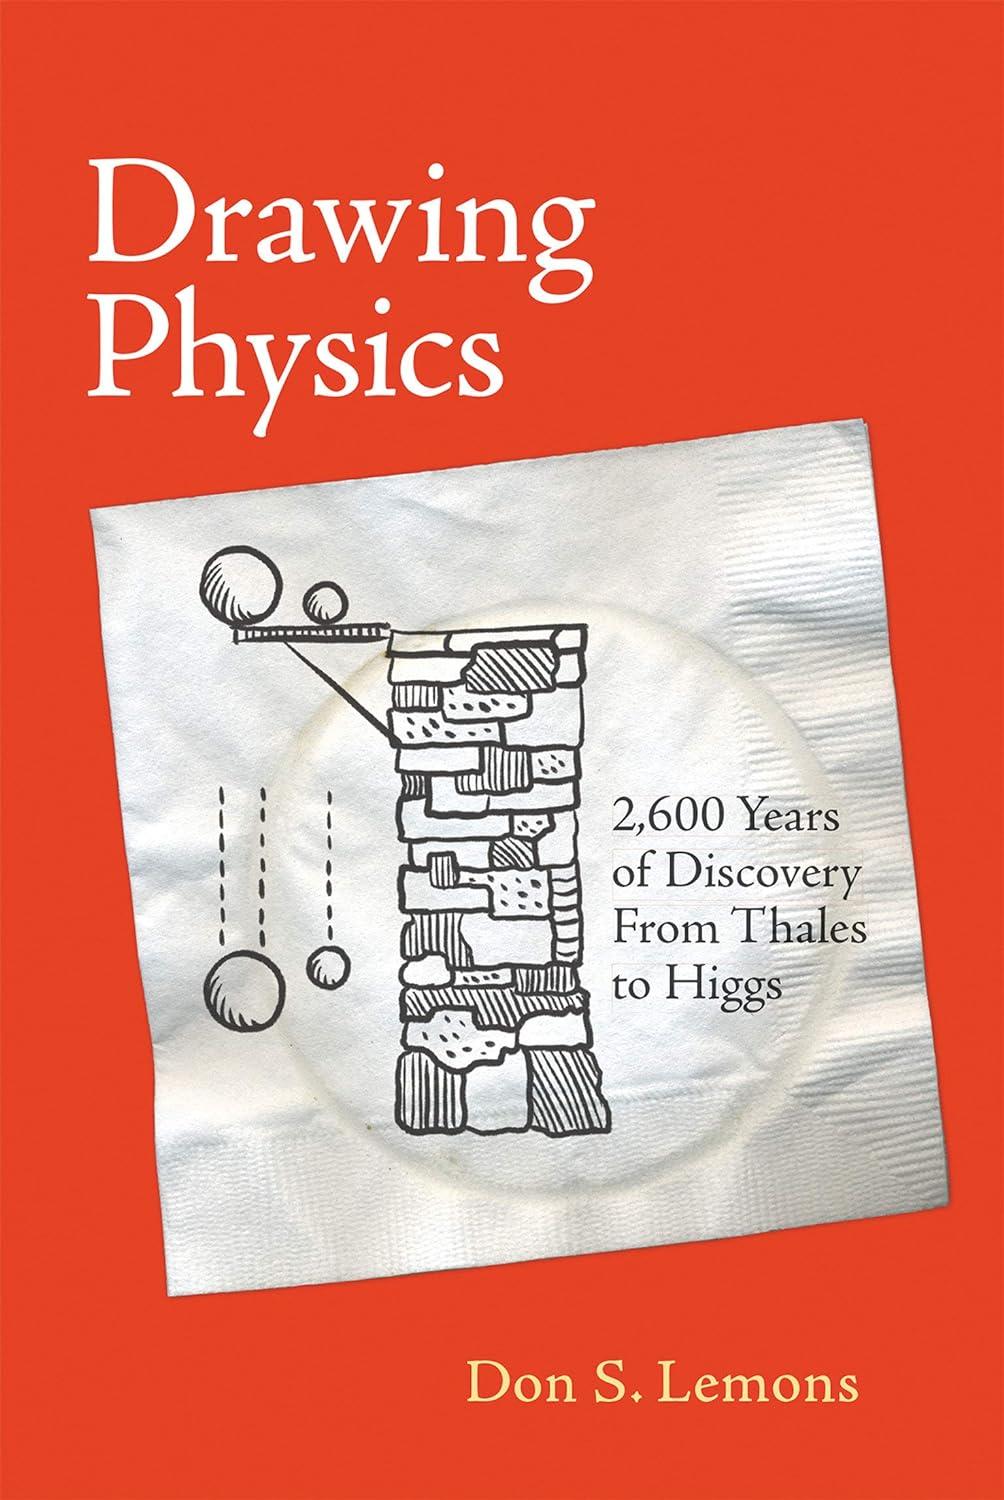 drawing physics 2600 years of discovery from thales to higgs 1st edition don s. lemons 026253519x,